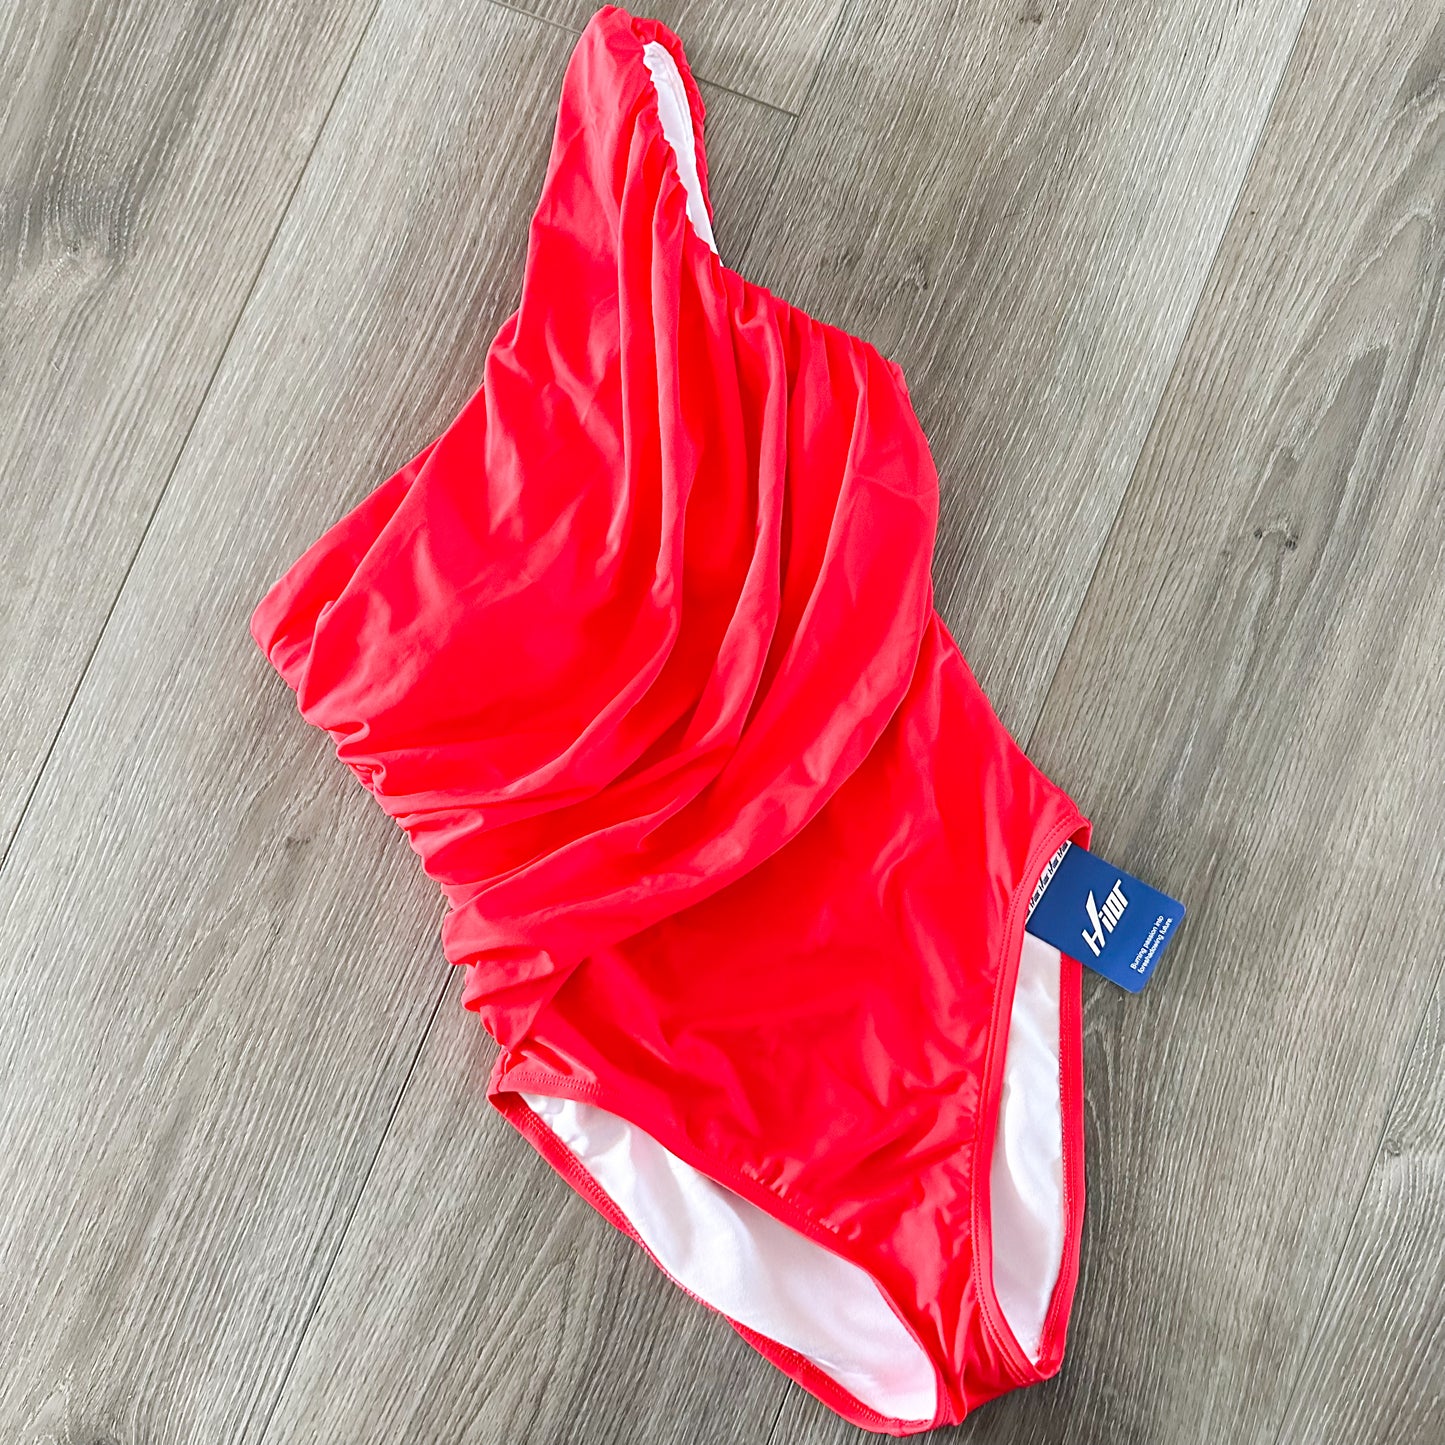 Hilor New Red One Shoulder One Piece Swimsuit Size 8